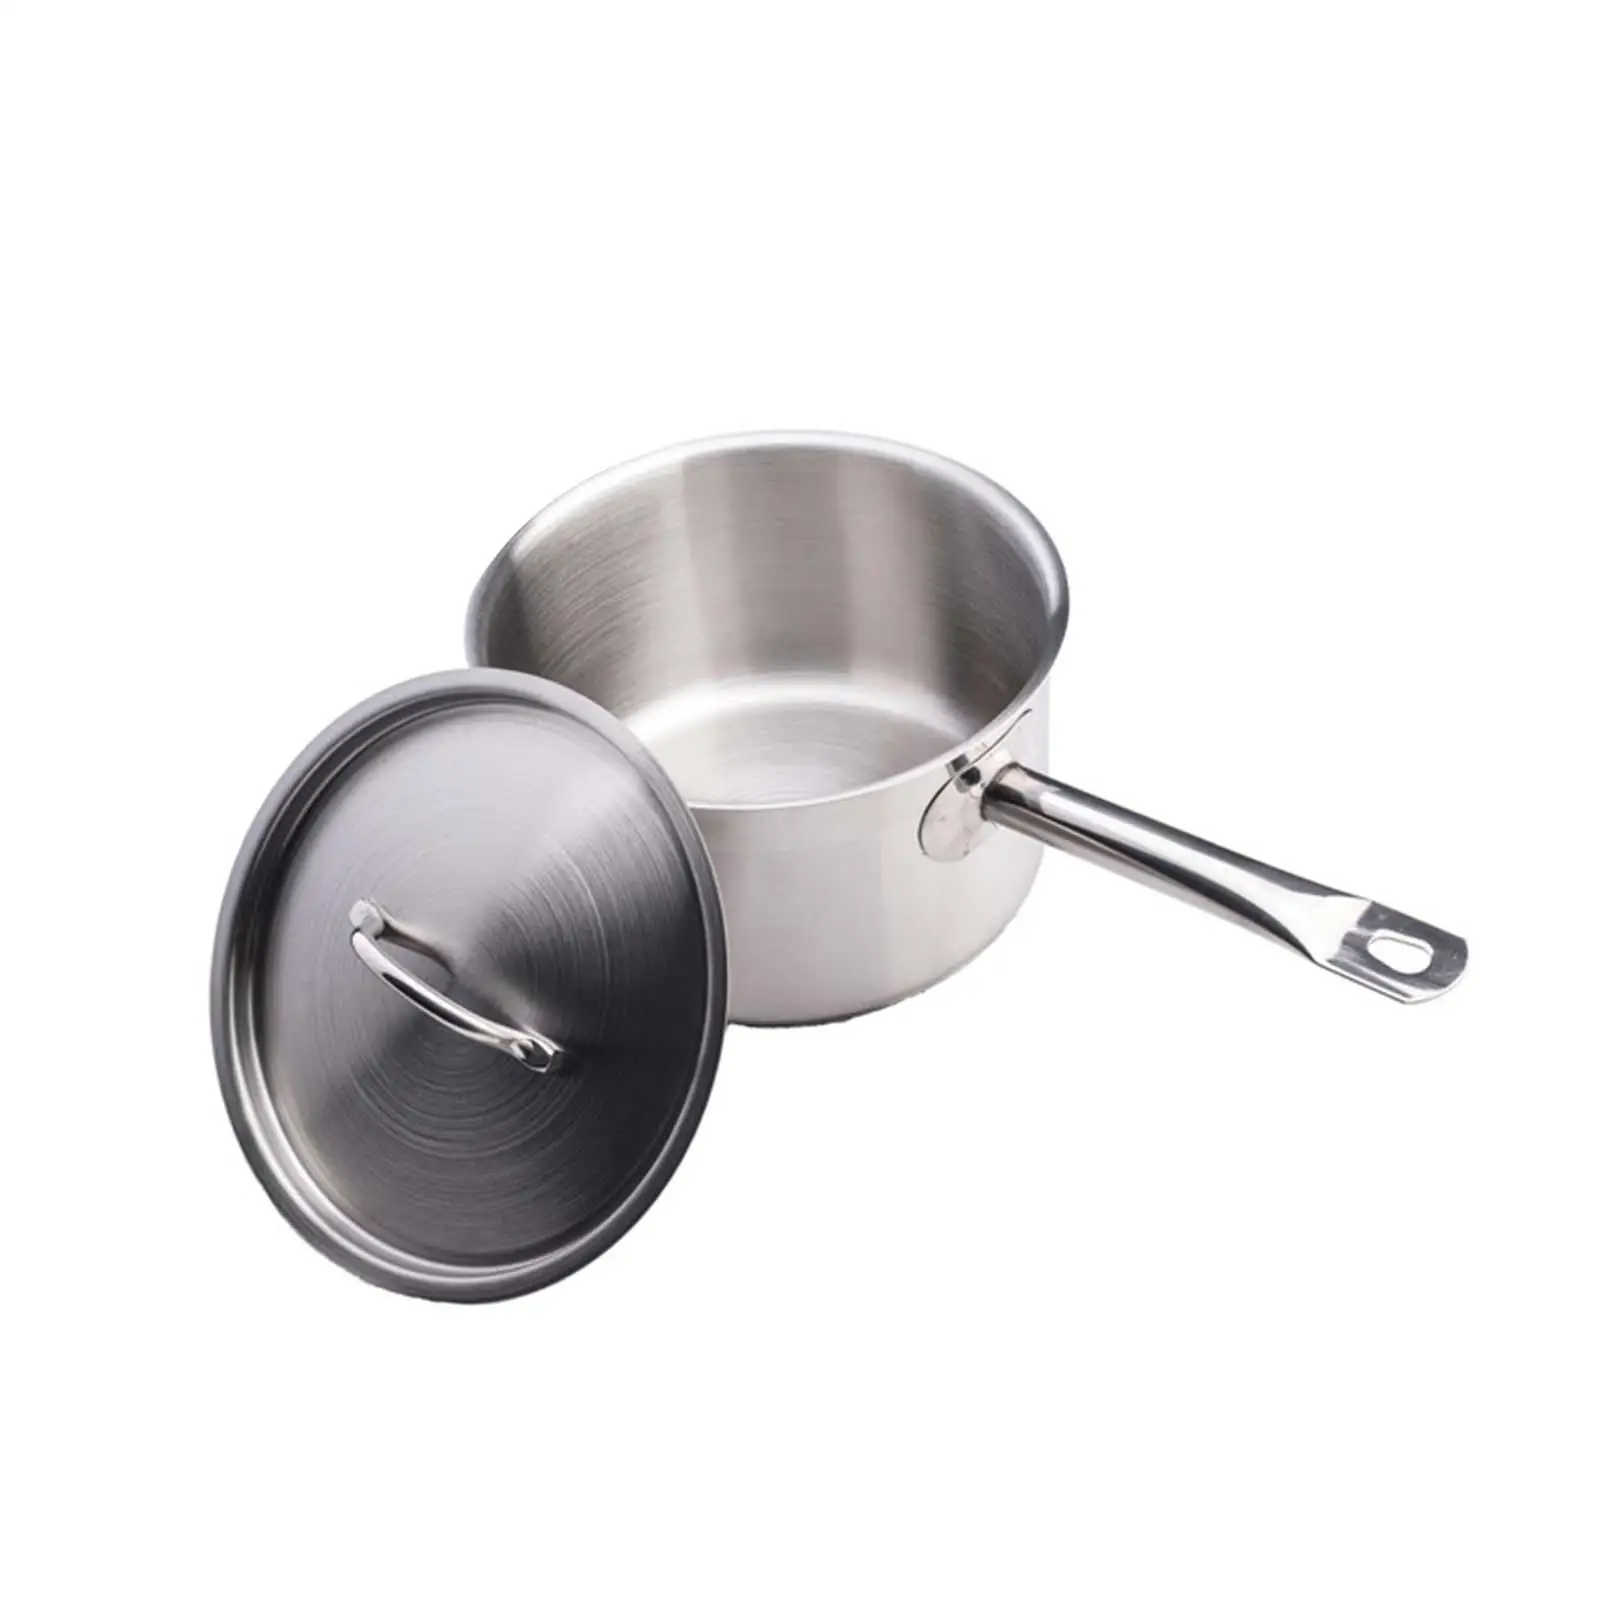 Stainless Steel Induction Milk Pots, Milk Pan and Long Handle, Sauce Pan with Lid for Home Kitchen Restaurant